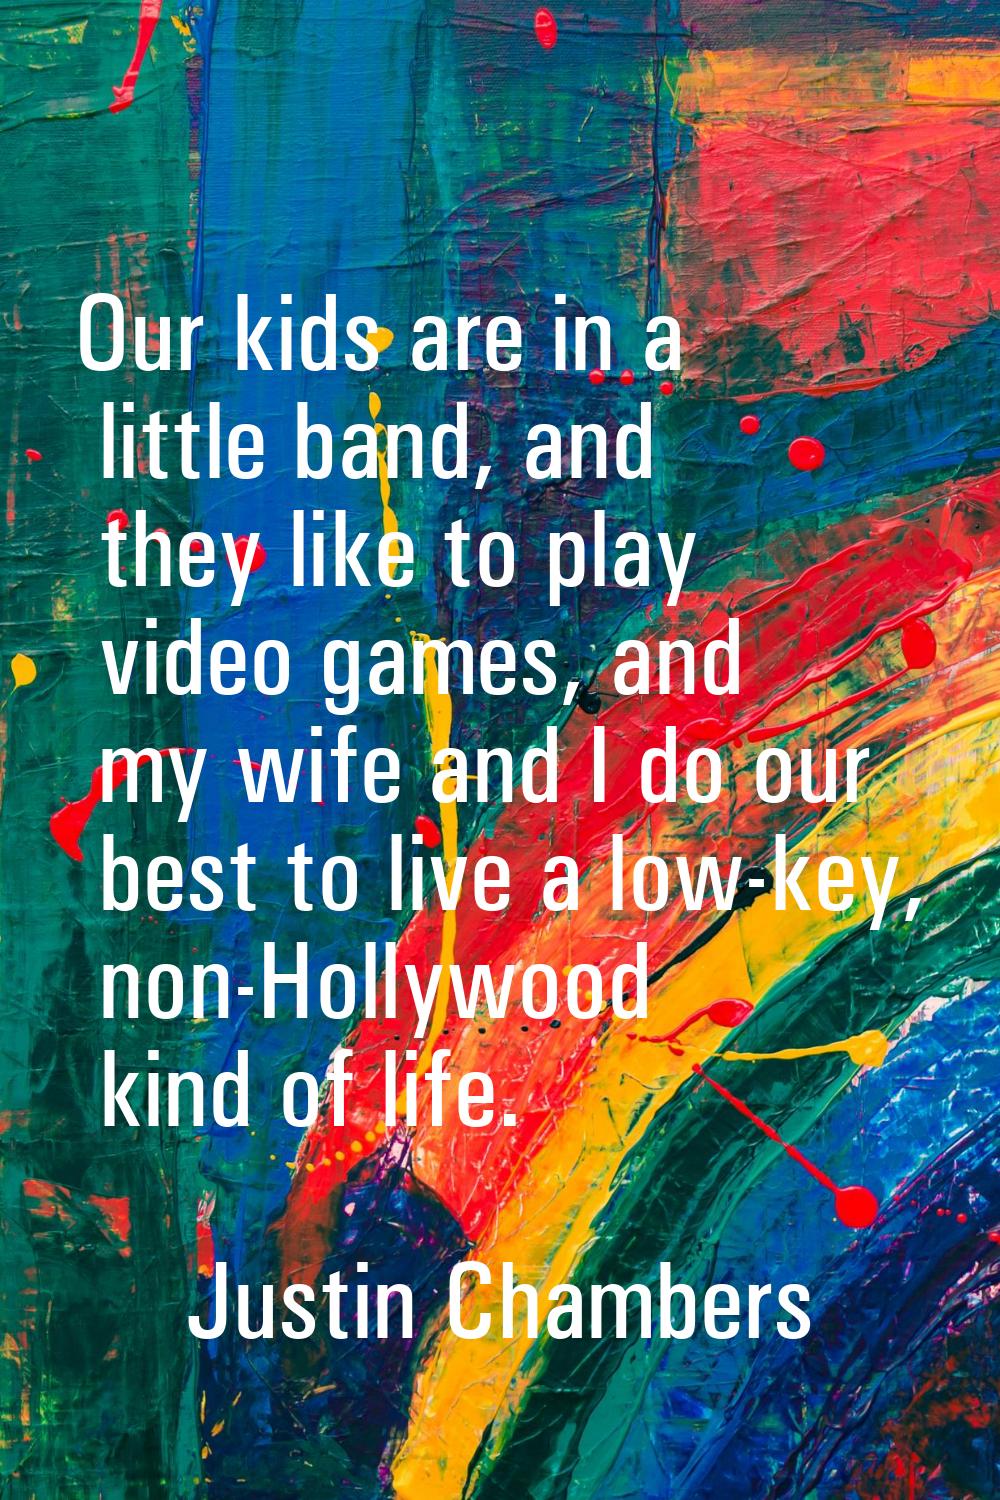 Our kids are in a little band, and they like to play video games, and my wife and I do our best to 